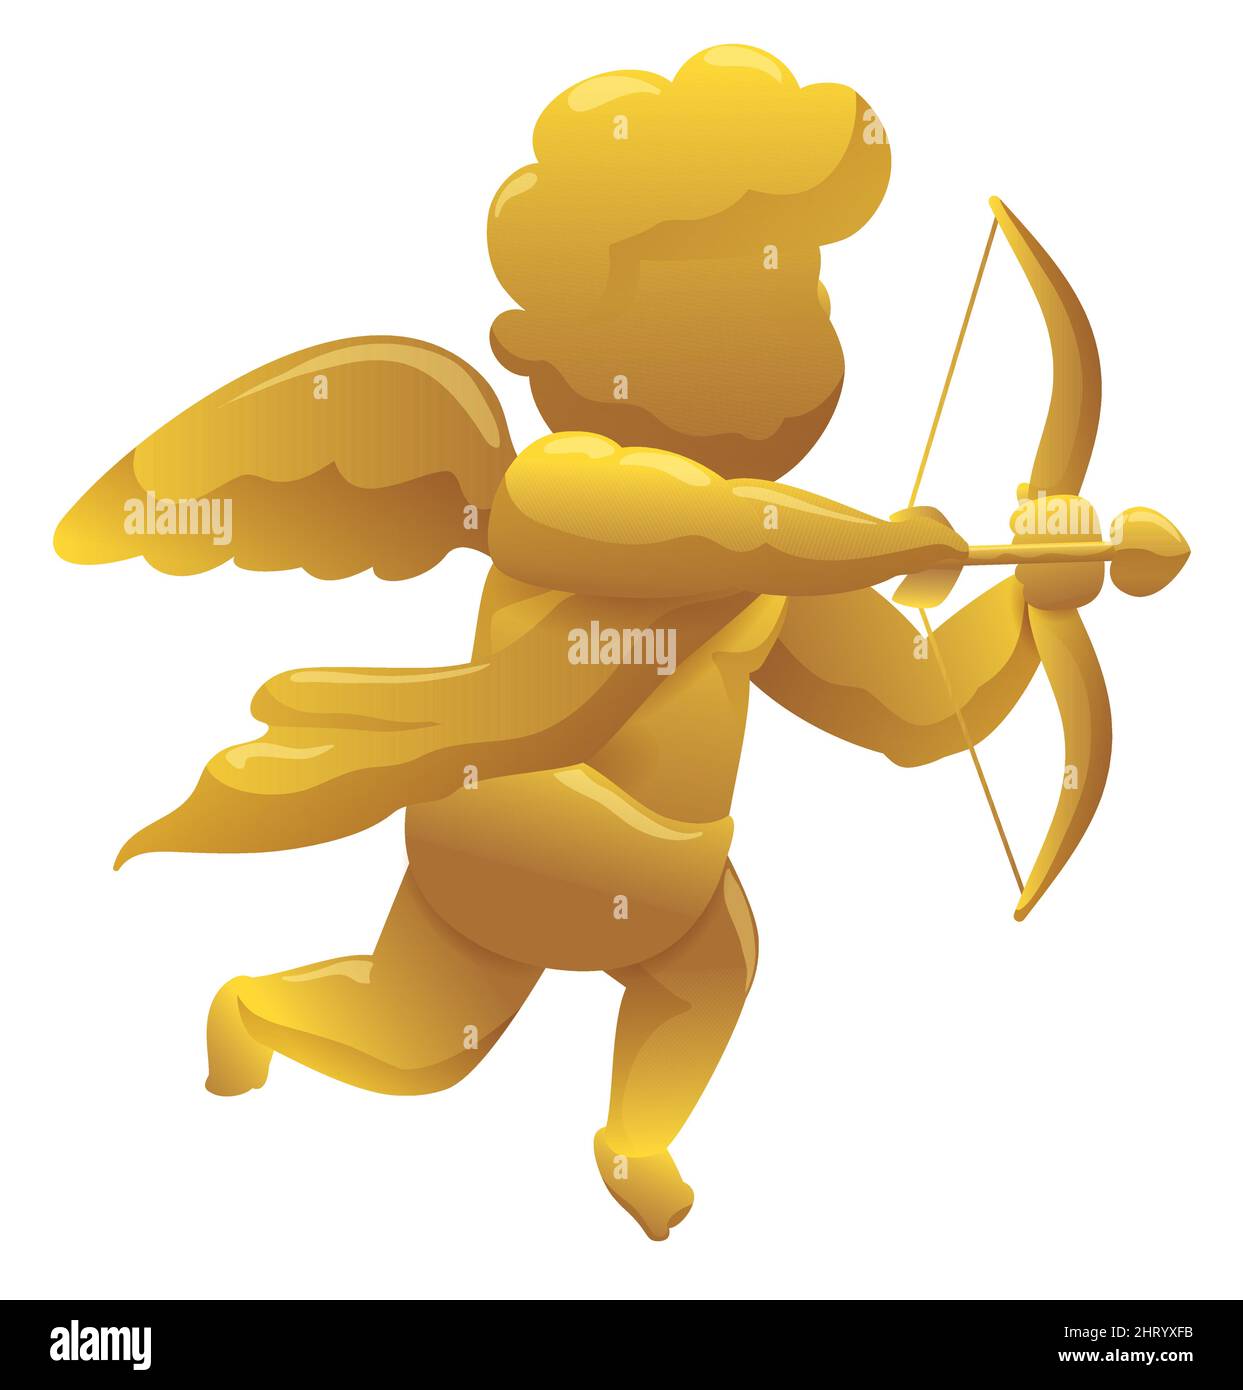 Golden cherub figurine with wings, bow and arrow, wearing a scarf and a tunic. Design isolated over white background. Stock Vector